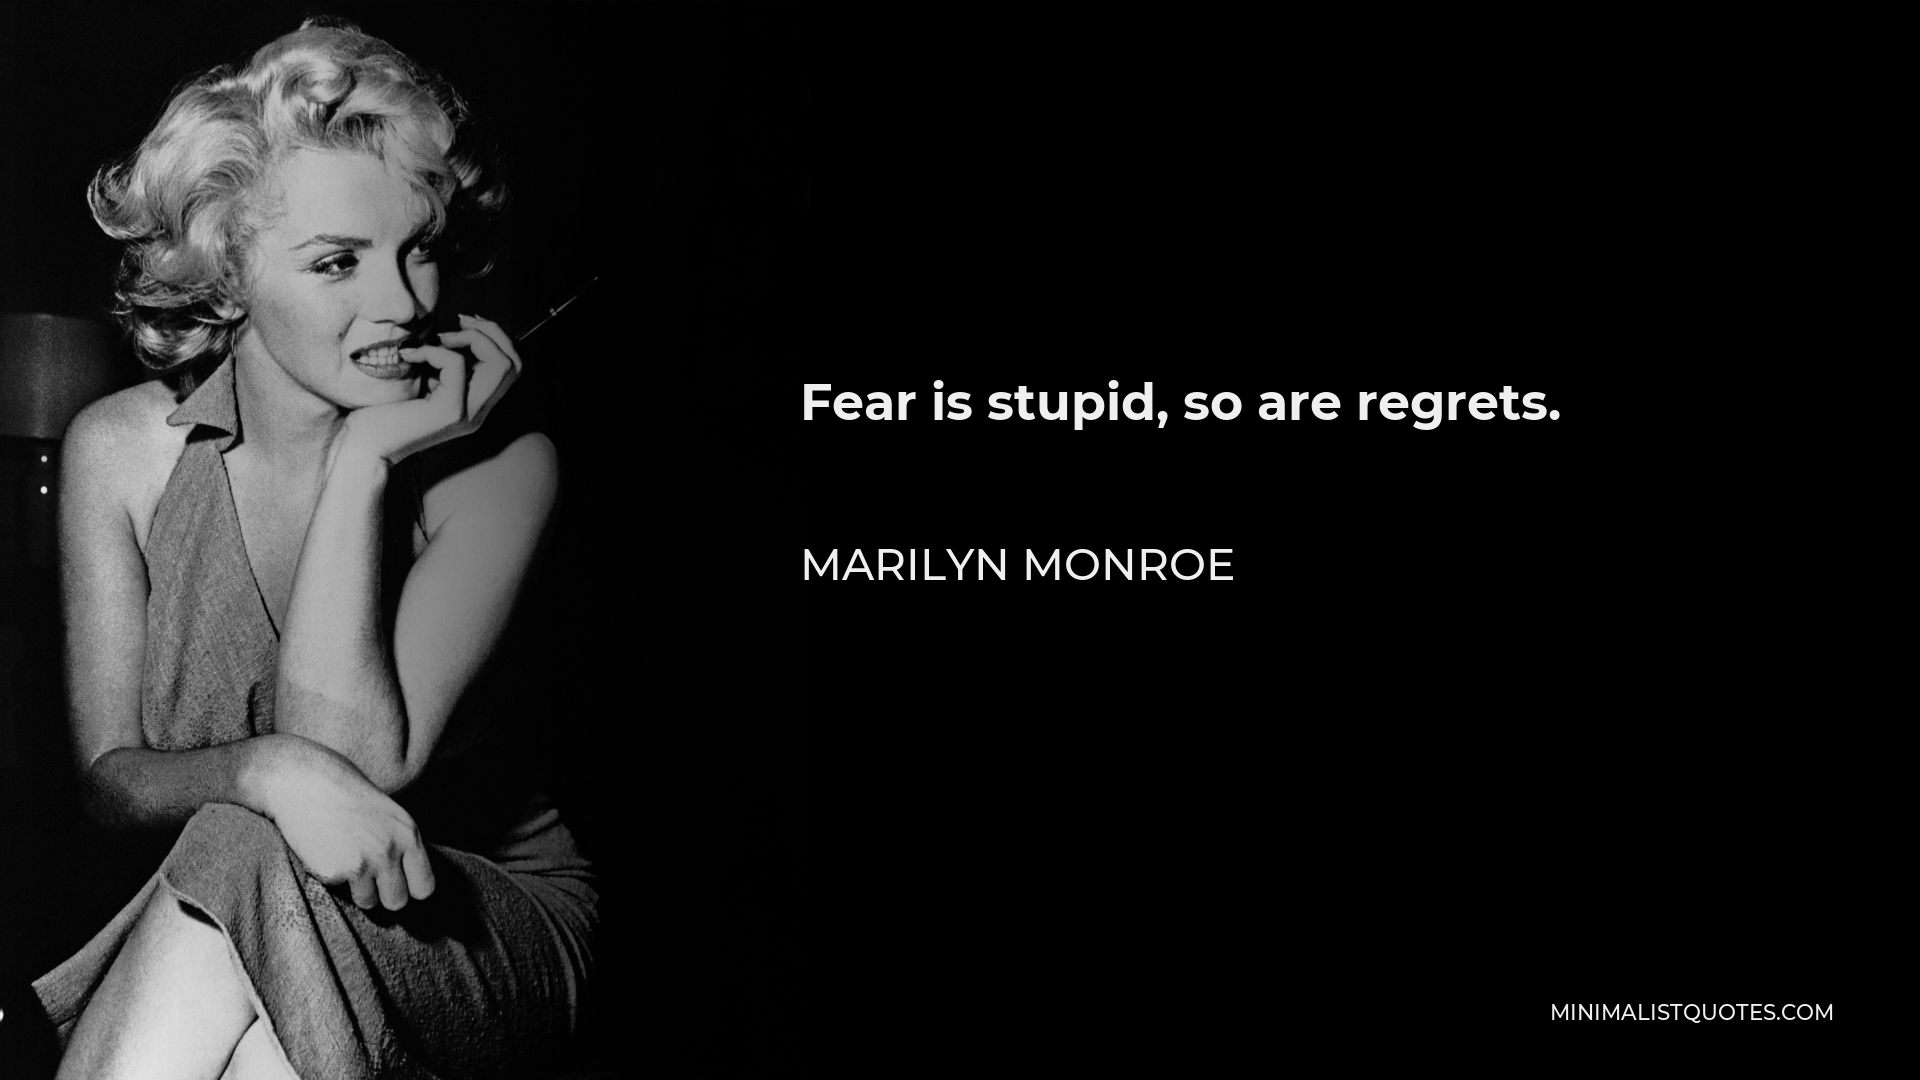 Marilyn Monroe Quote - Fear is stupid, so are regrets.